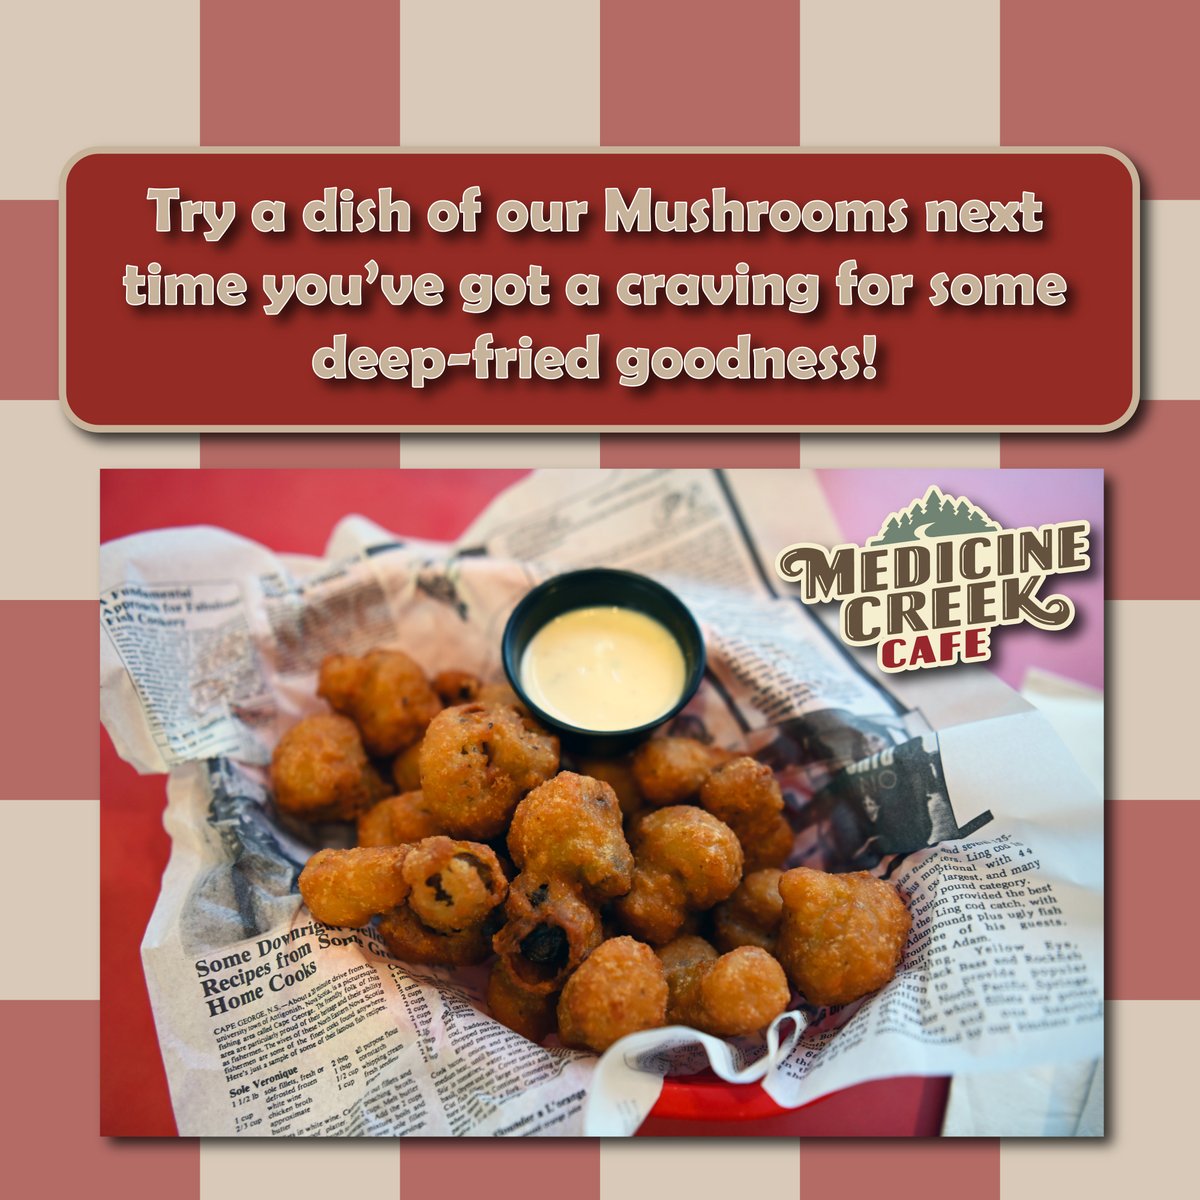 We’ve got all the comfort food you could need. Dine with us today! #DeepFried #FriedMushrooms #NisquallyTribe